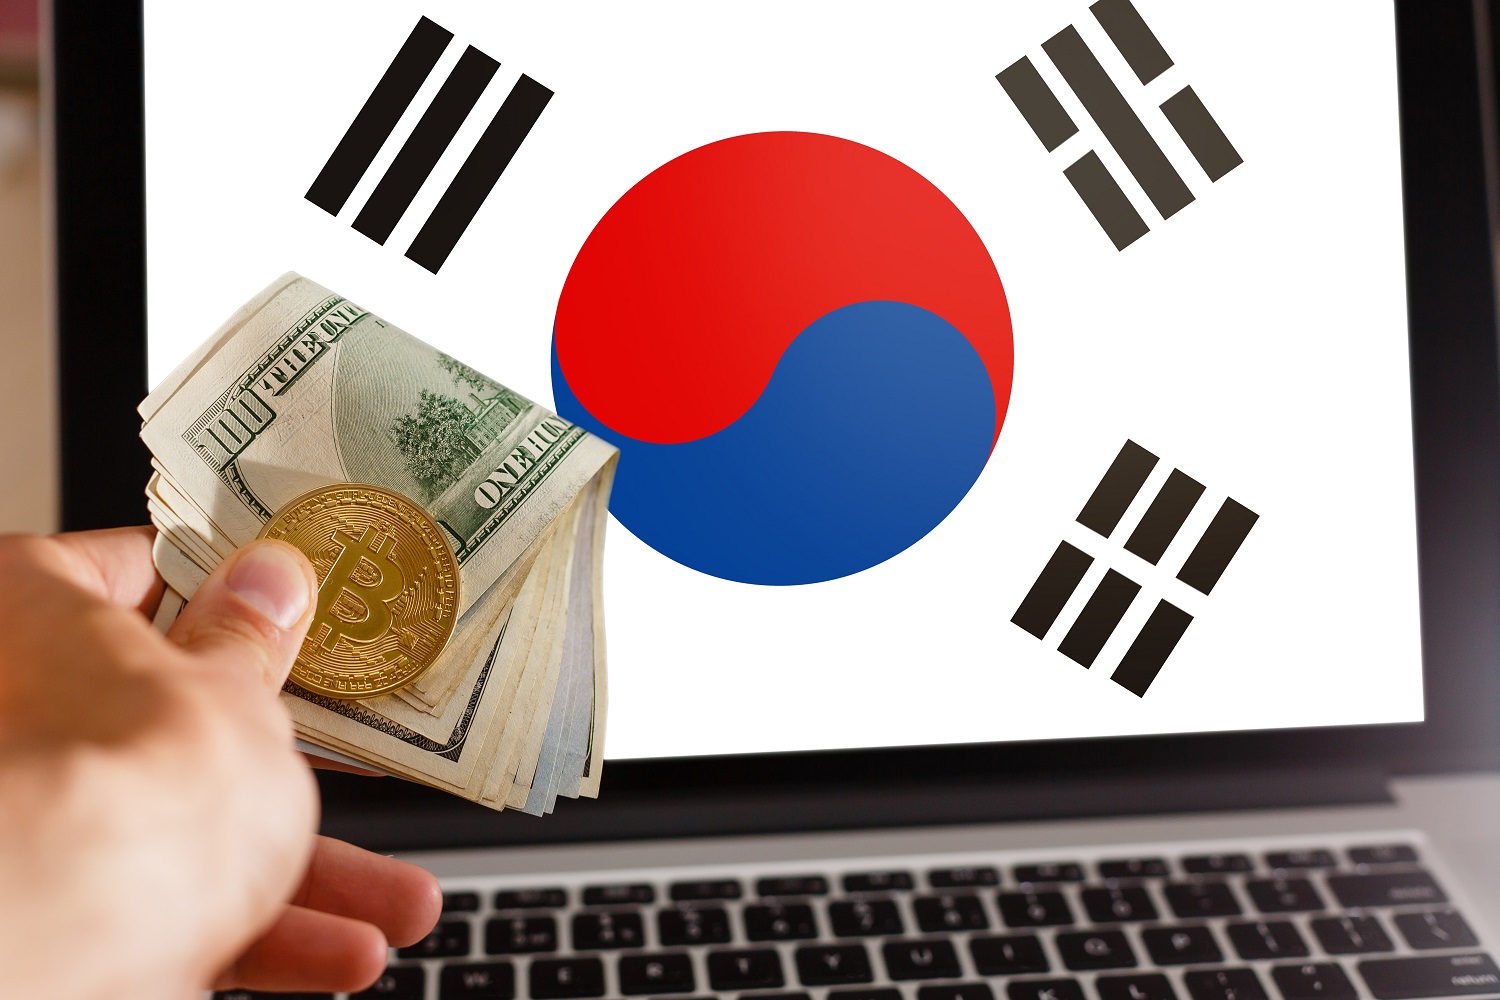 A hand holds US dollar banknotes, as well as a metal token intended to represent Bitcoin in front of a laptop screen with a South Korean flag displayed on its screen.